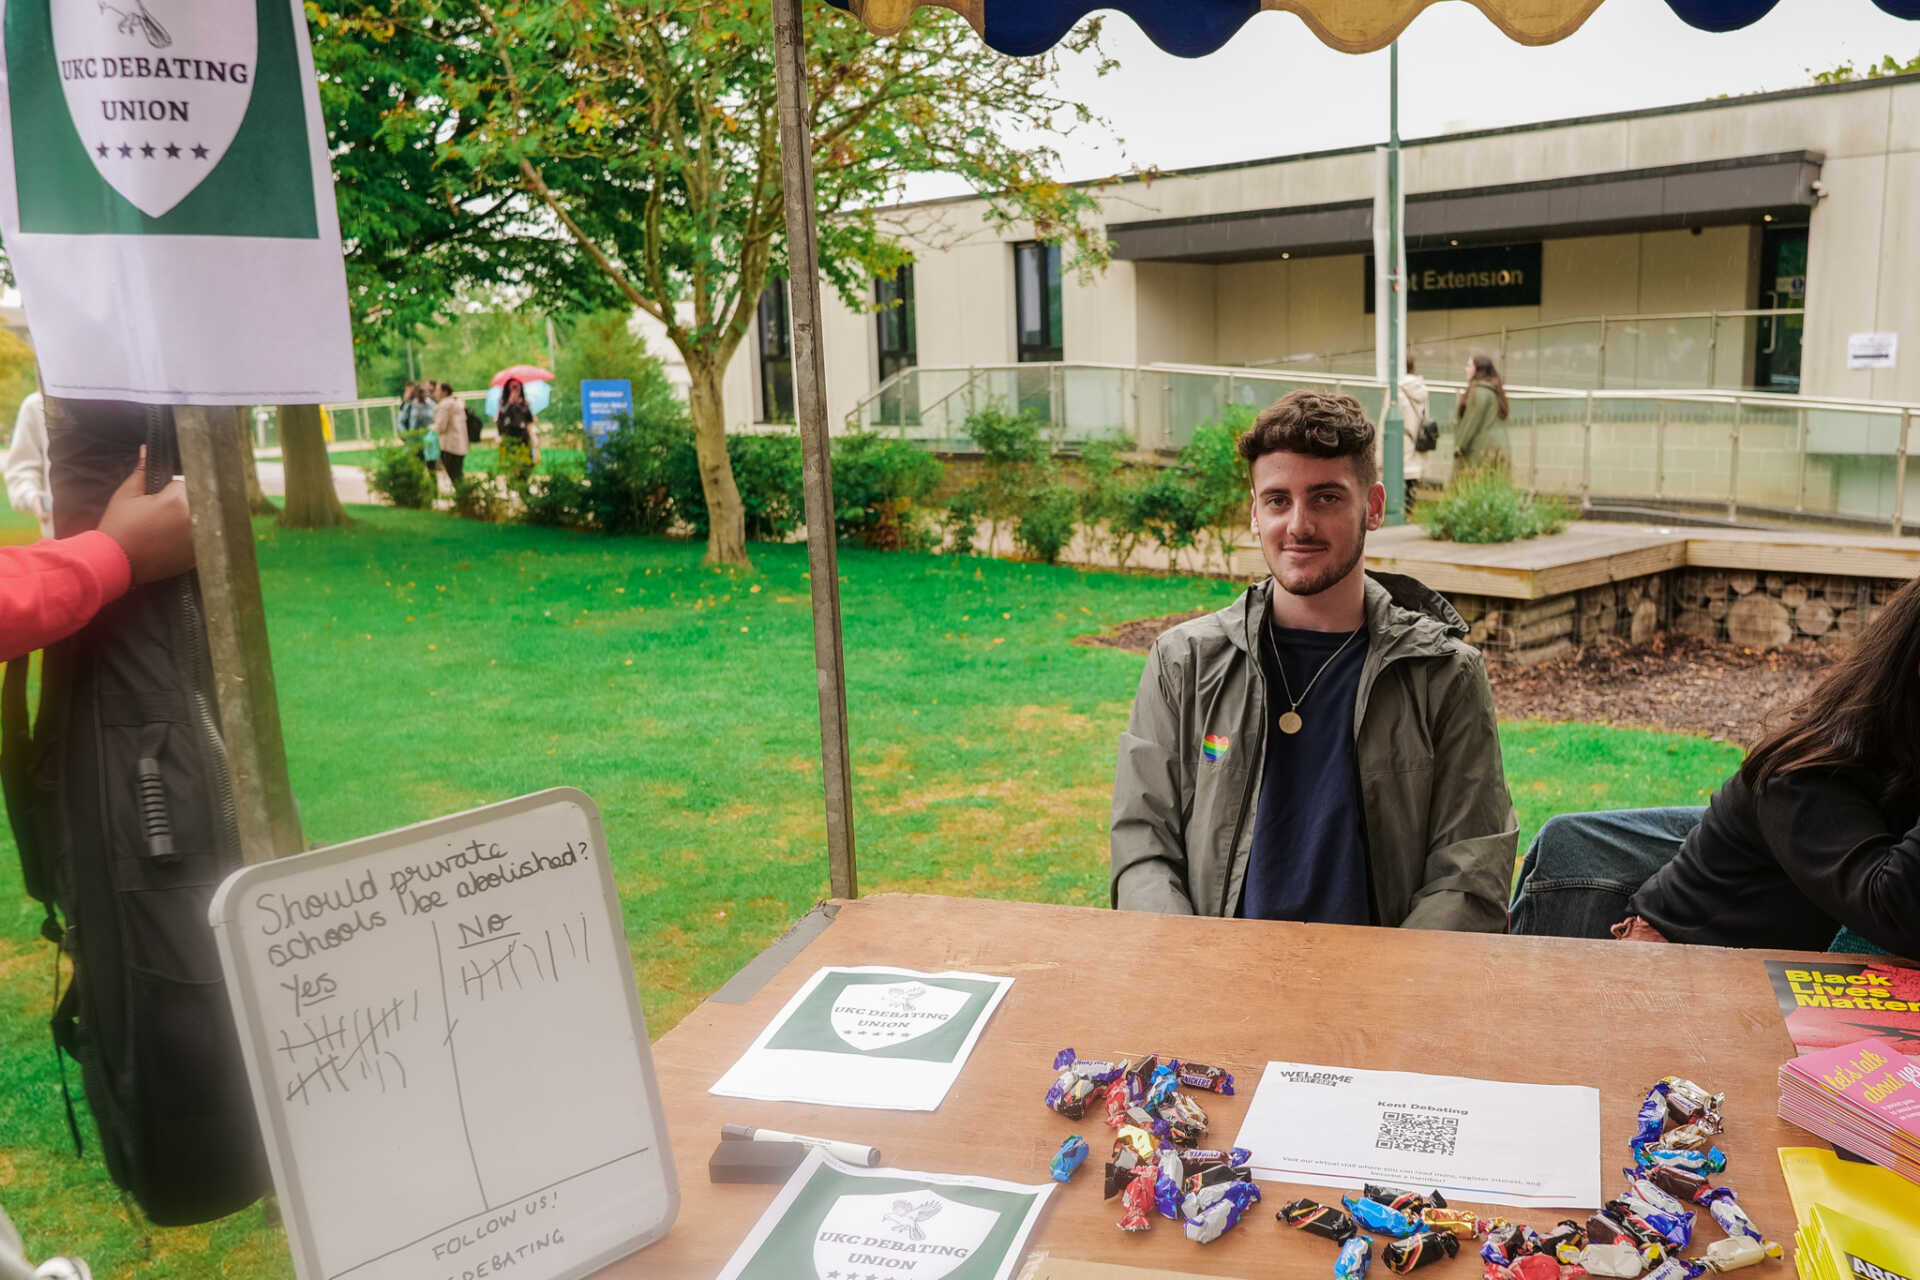 Student Charlie Cushway on the Debating Society Stand at Welcome week.